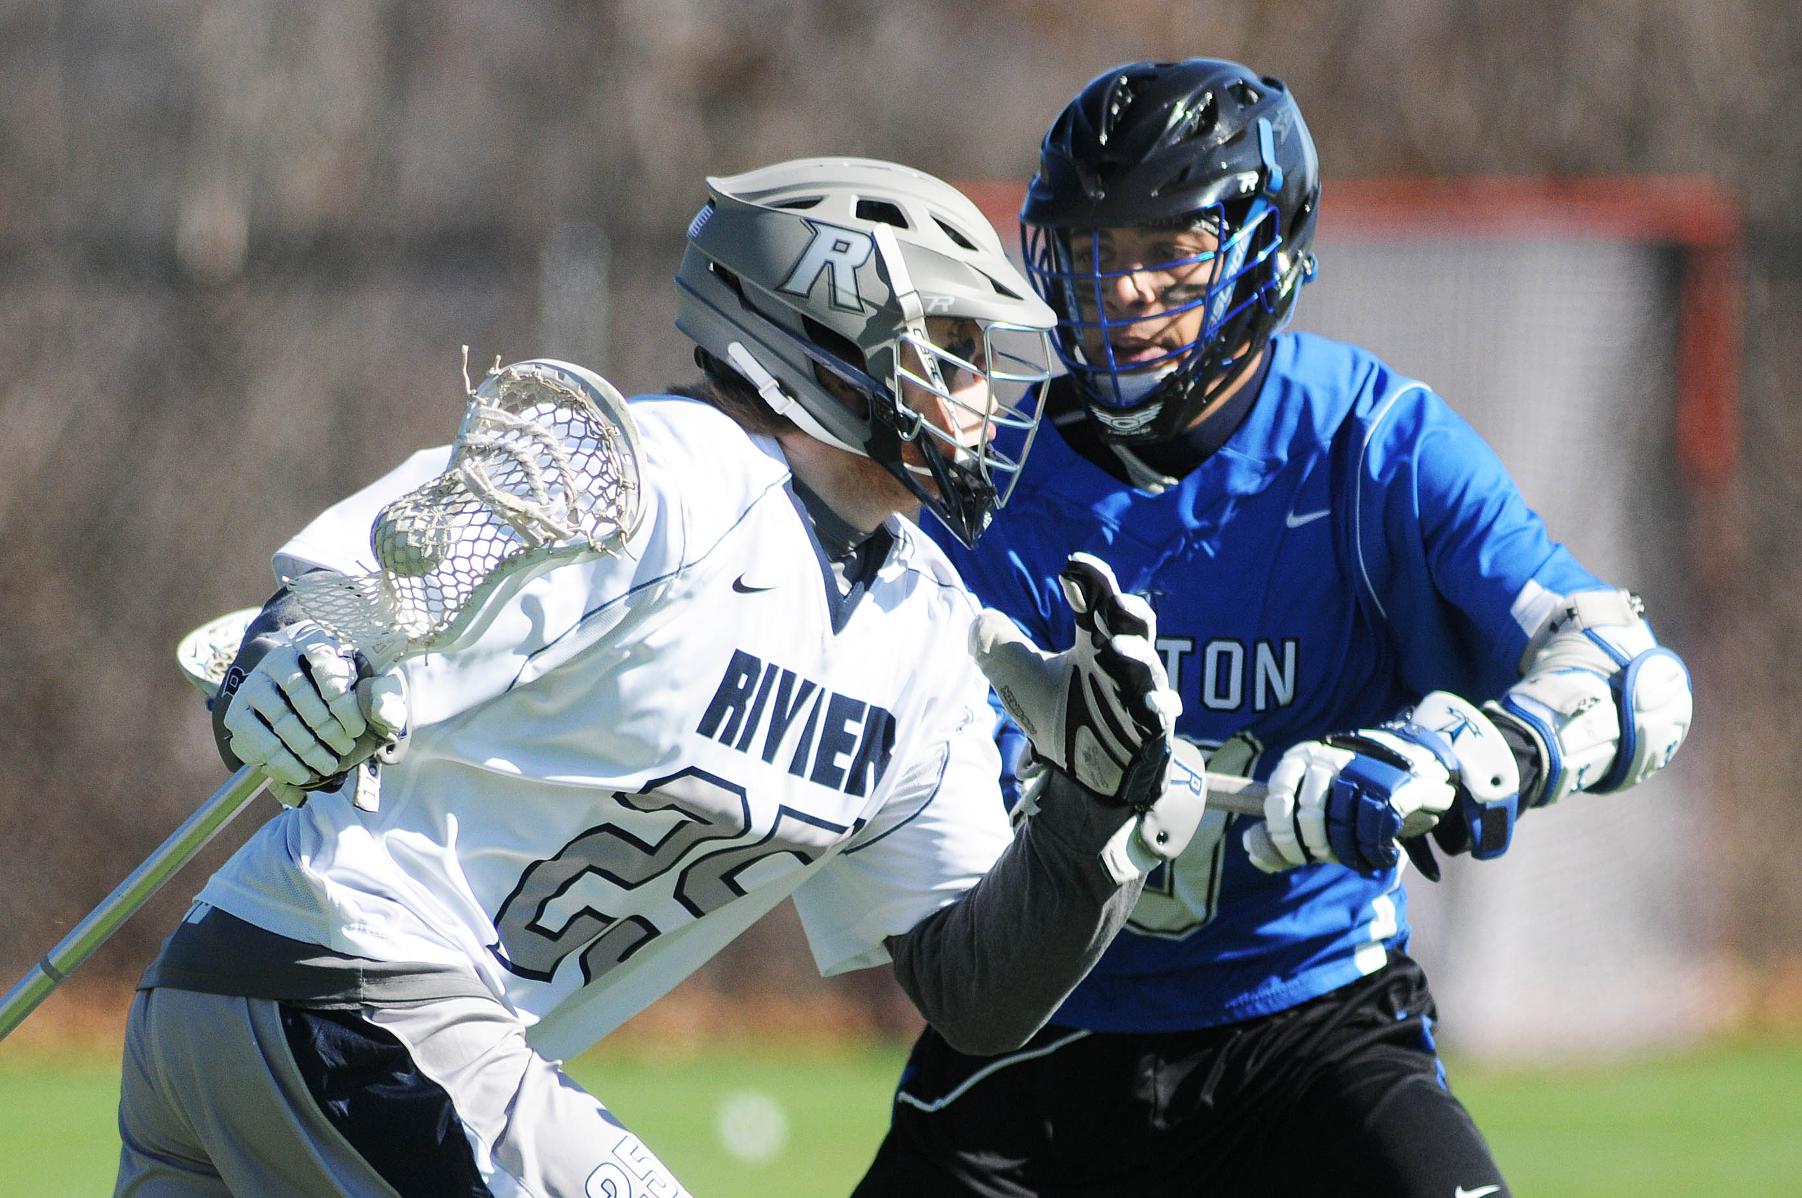 Men's Lacrosse: Raiders tripped up at Dean College